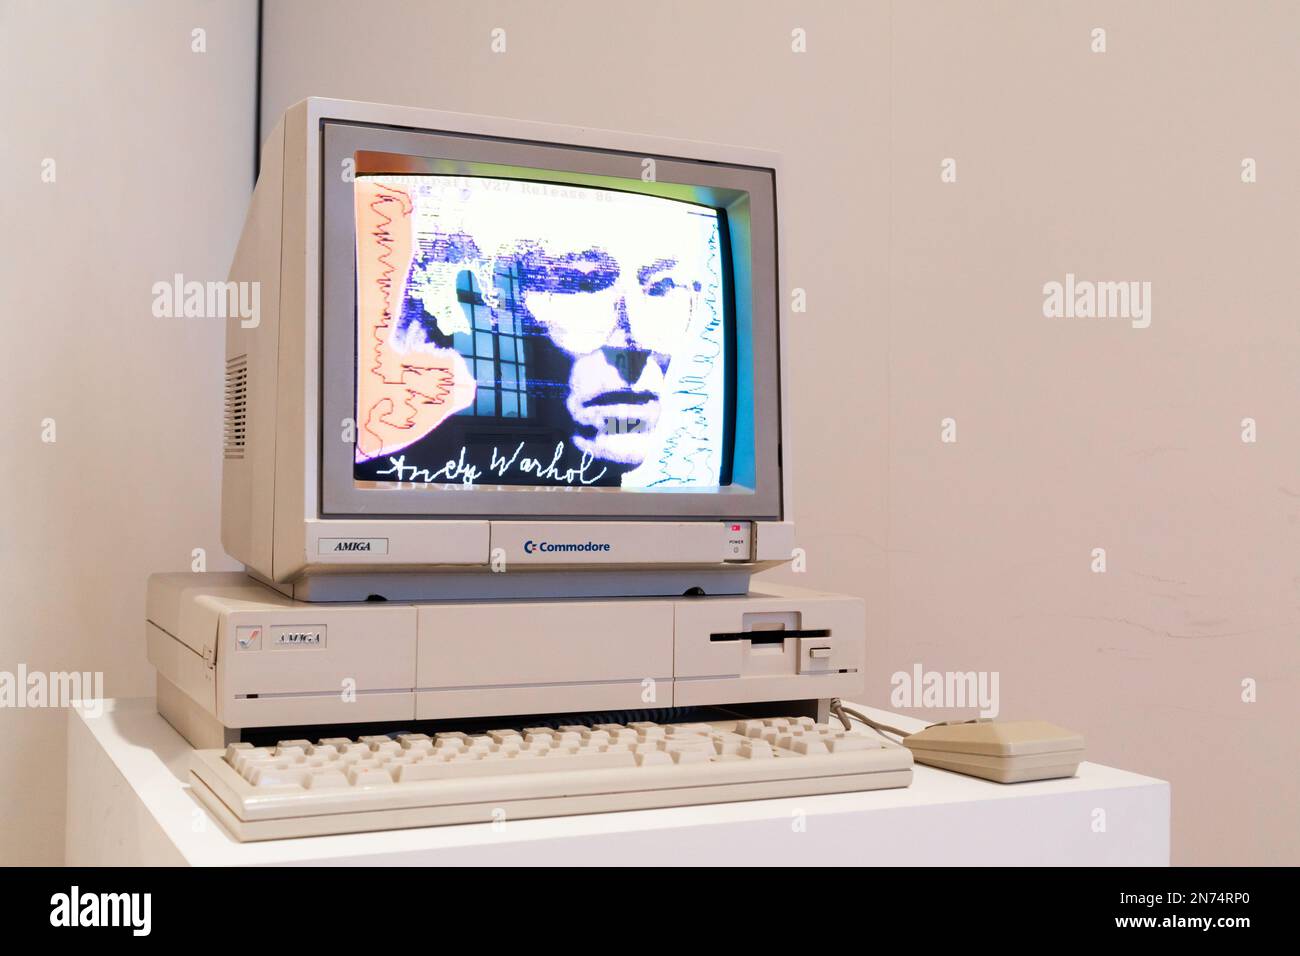 Venaria Reale, Italy - October 2022: Computer Commodore Amiga 1000 with floppy disk, mouse, beige Stock Photo